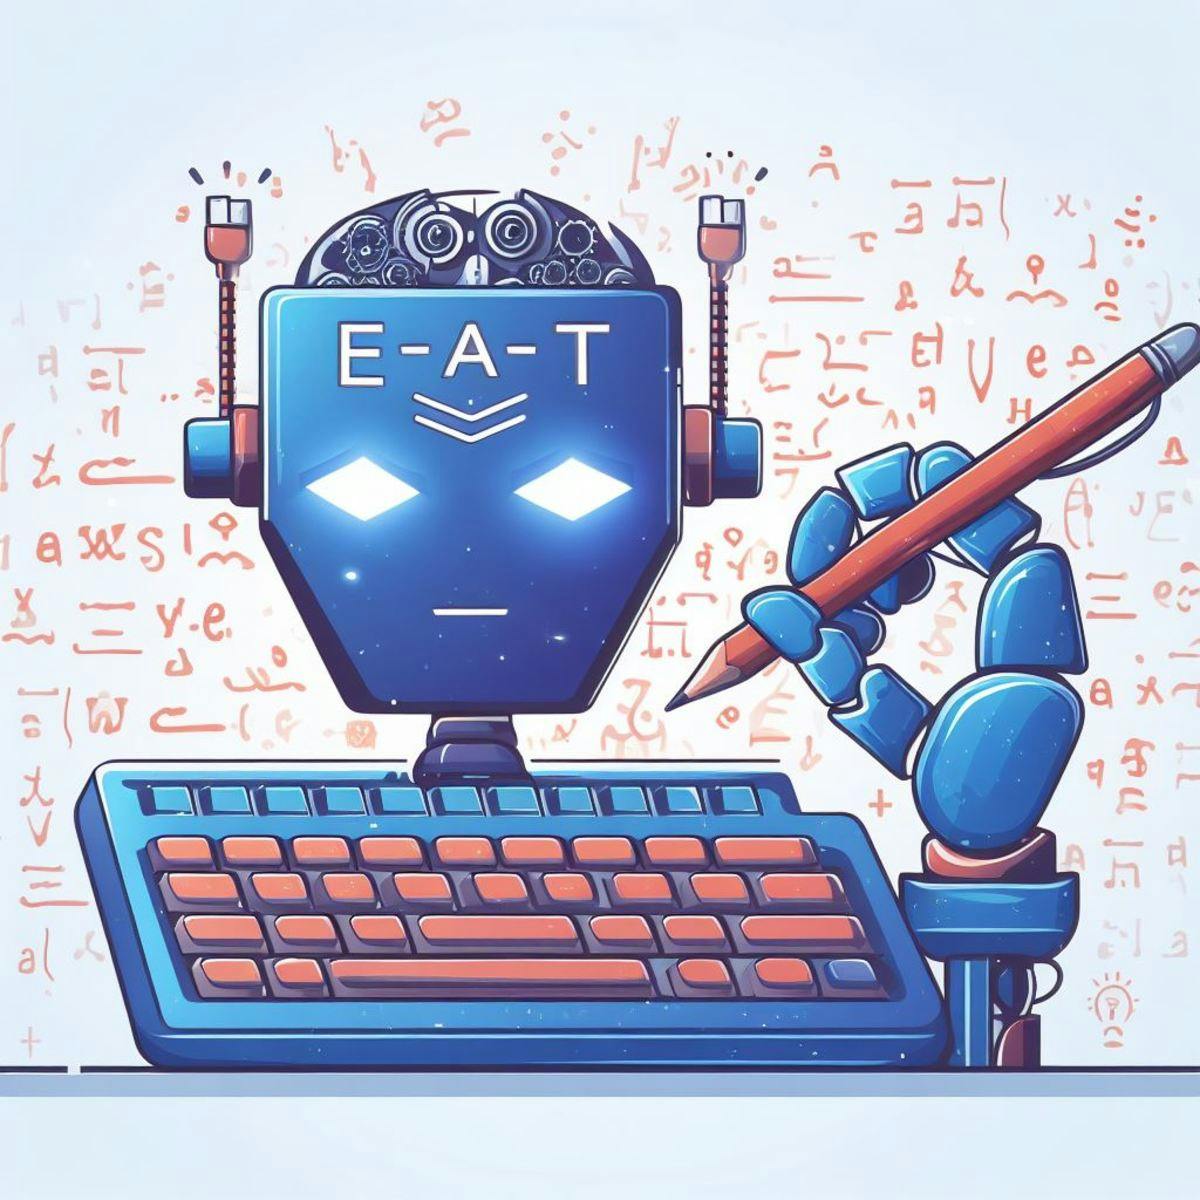 A robot with "E-A-T" written on its forehead, surrounded by AI writing tools.